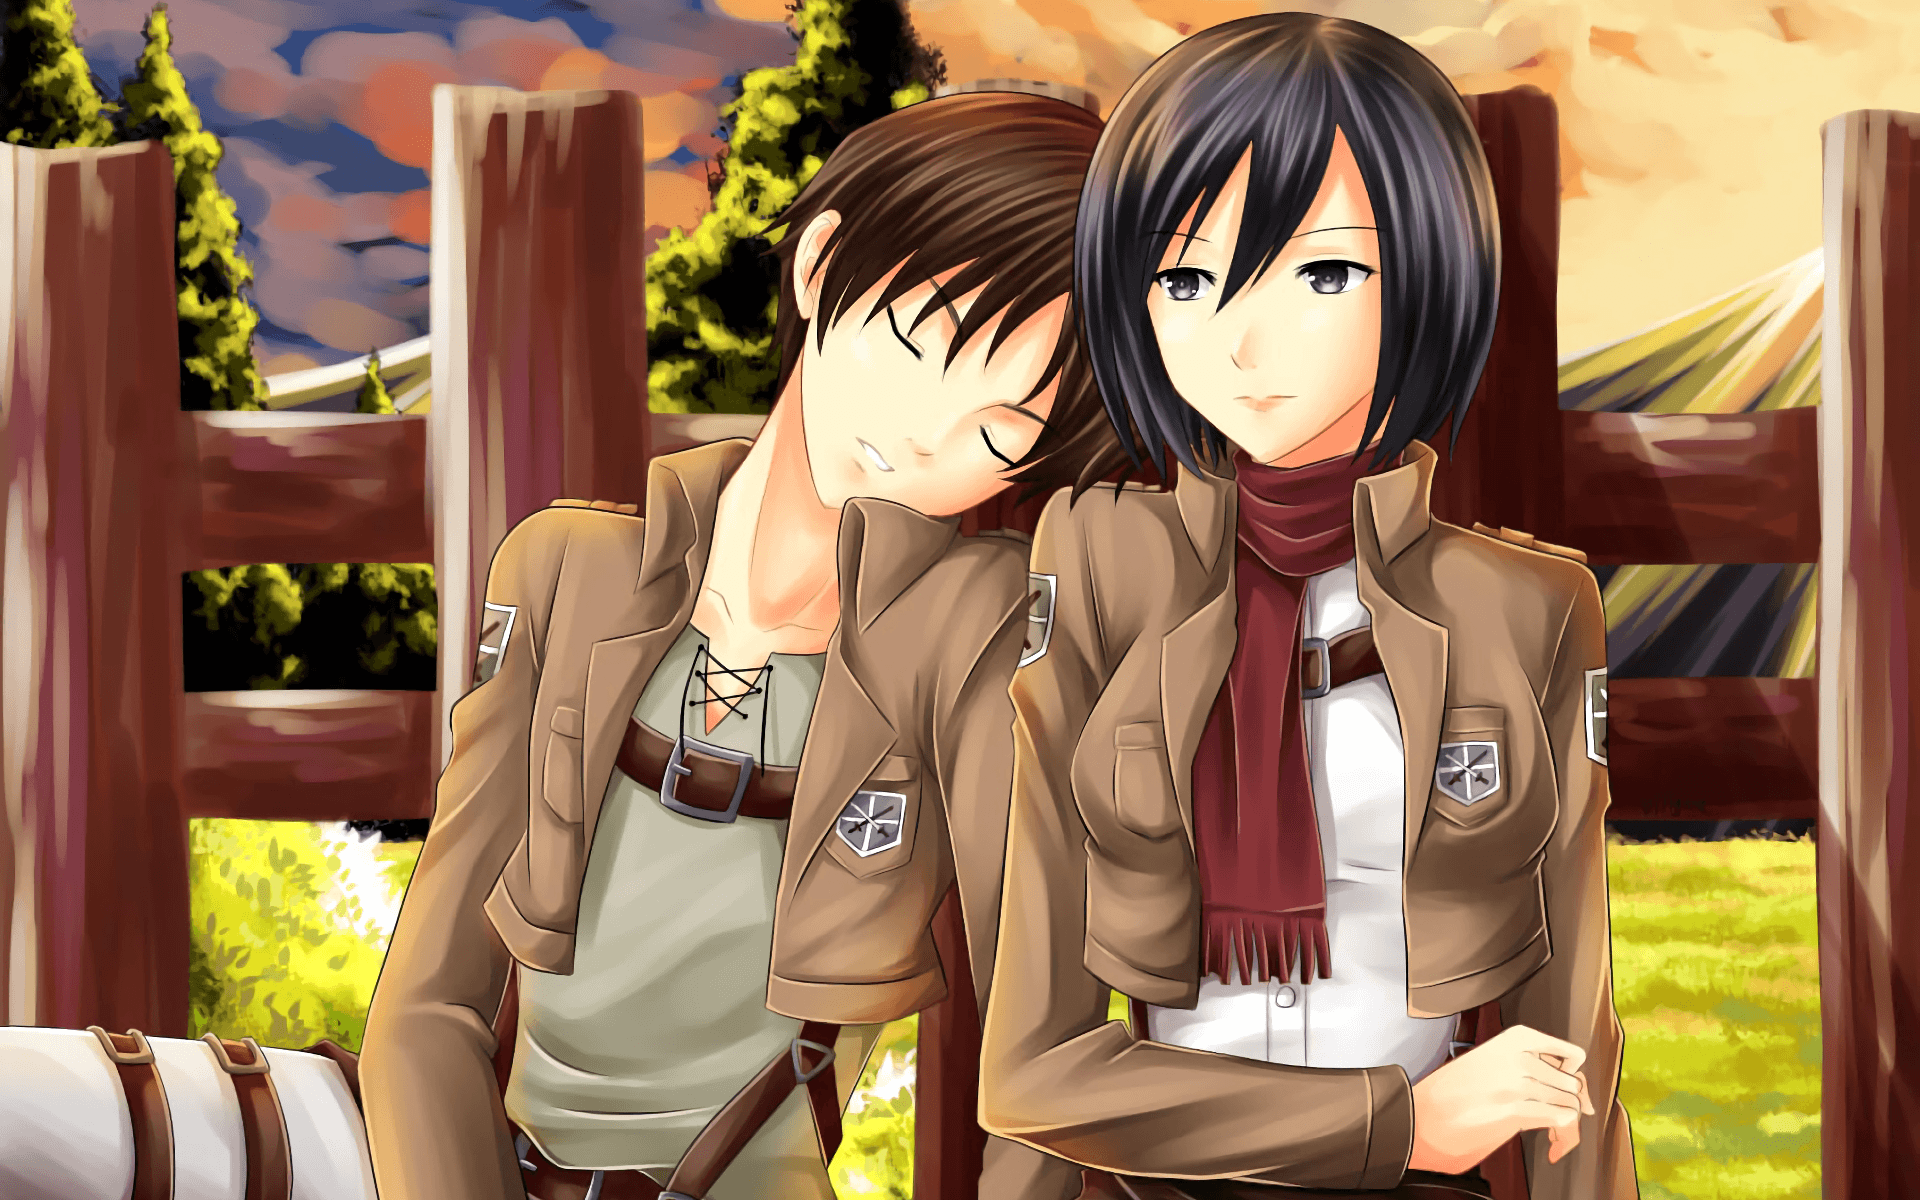 levi and mikasa look over the shoulder